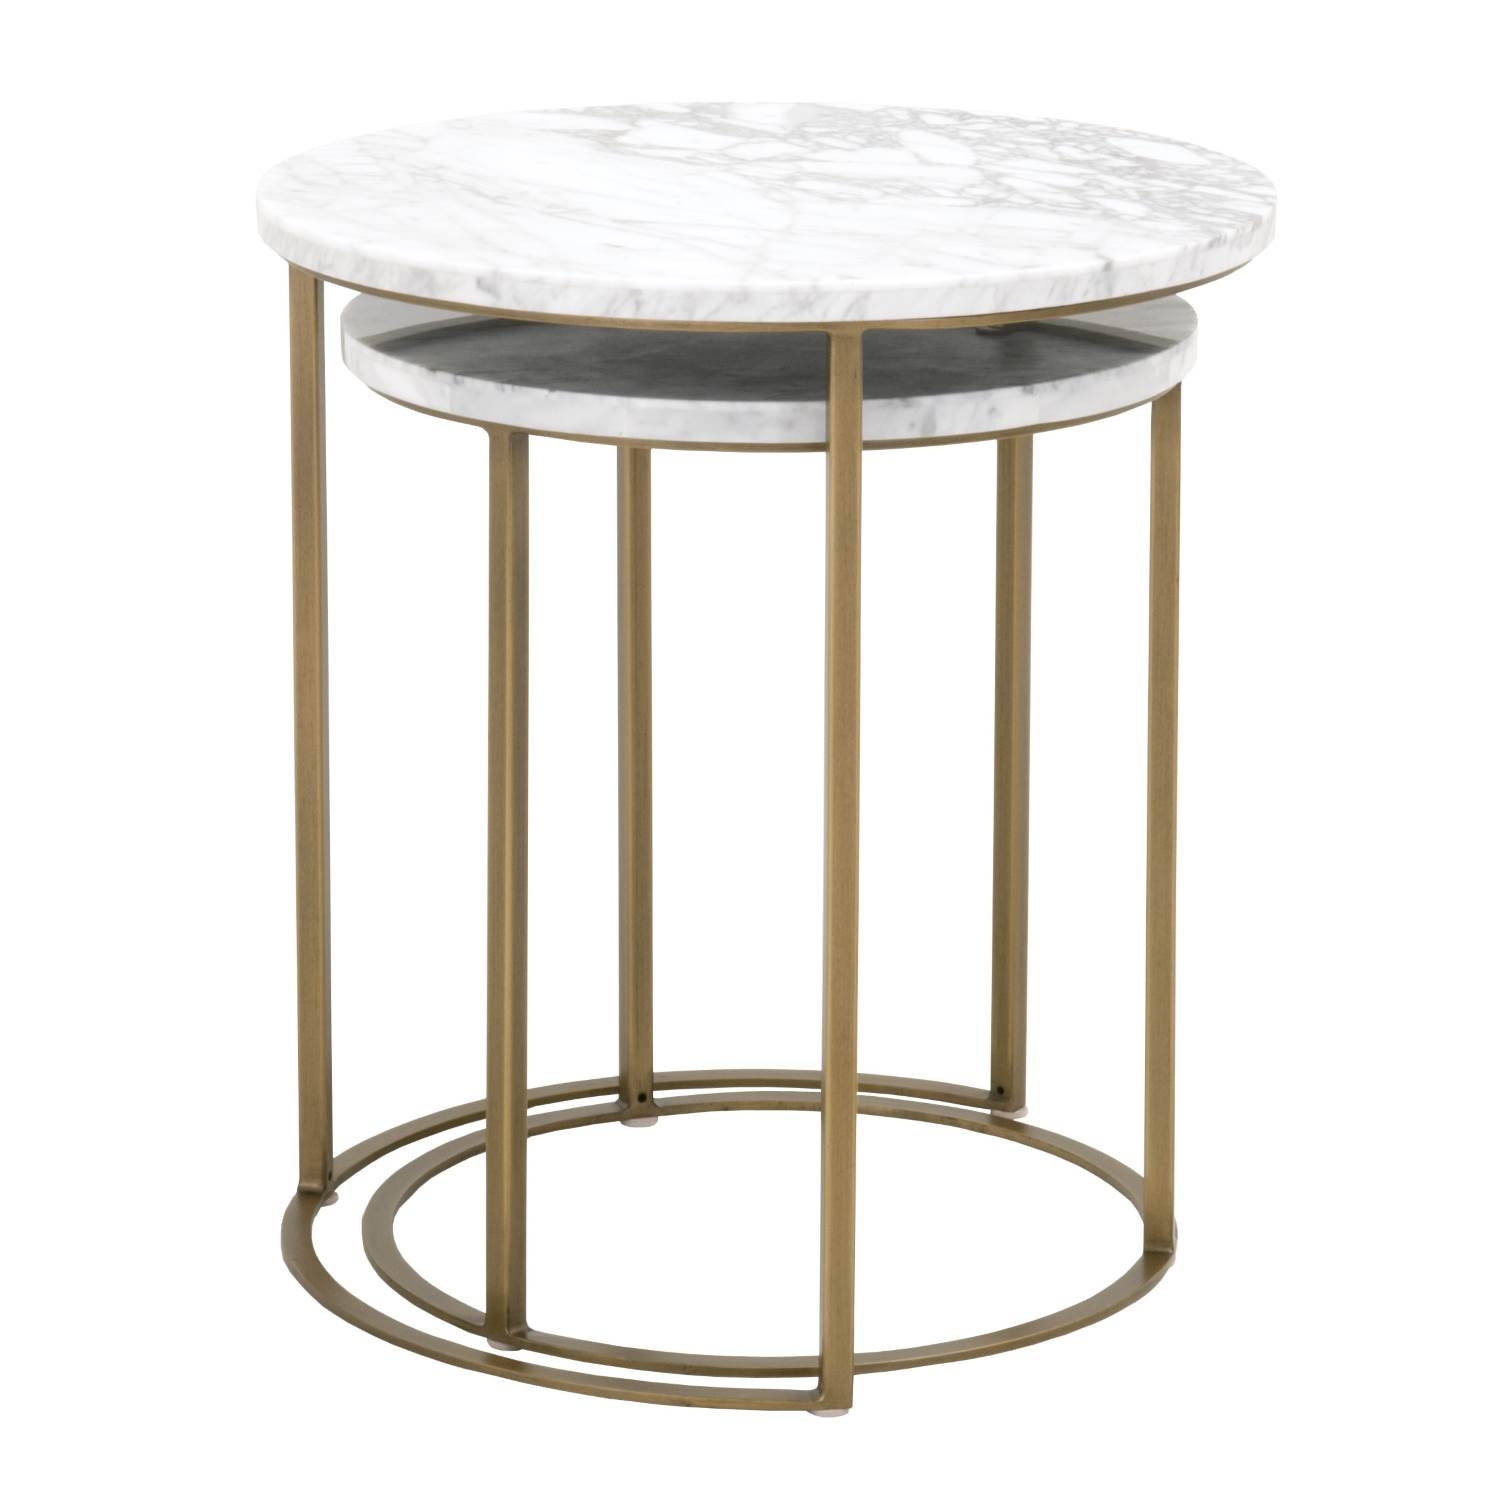 Carrera Round Nesting Accent Table - Image 1